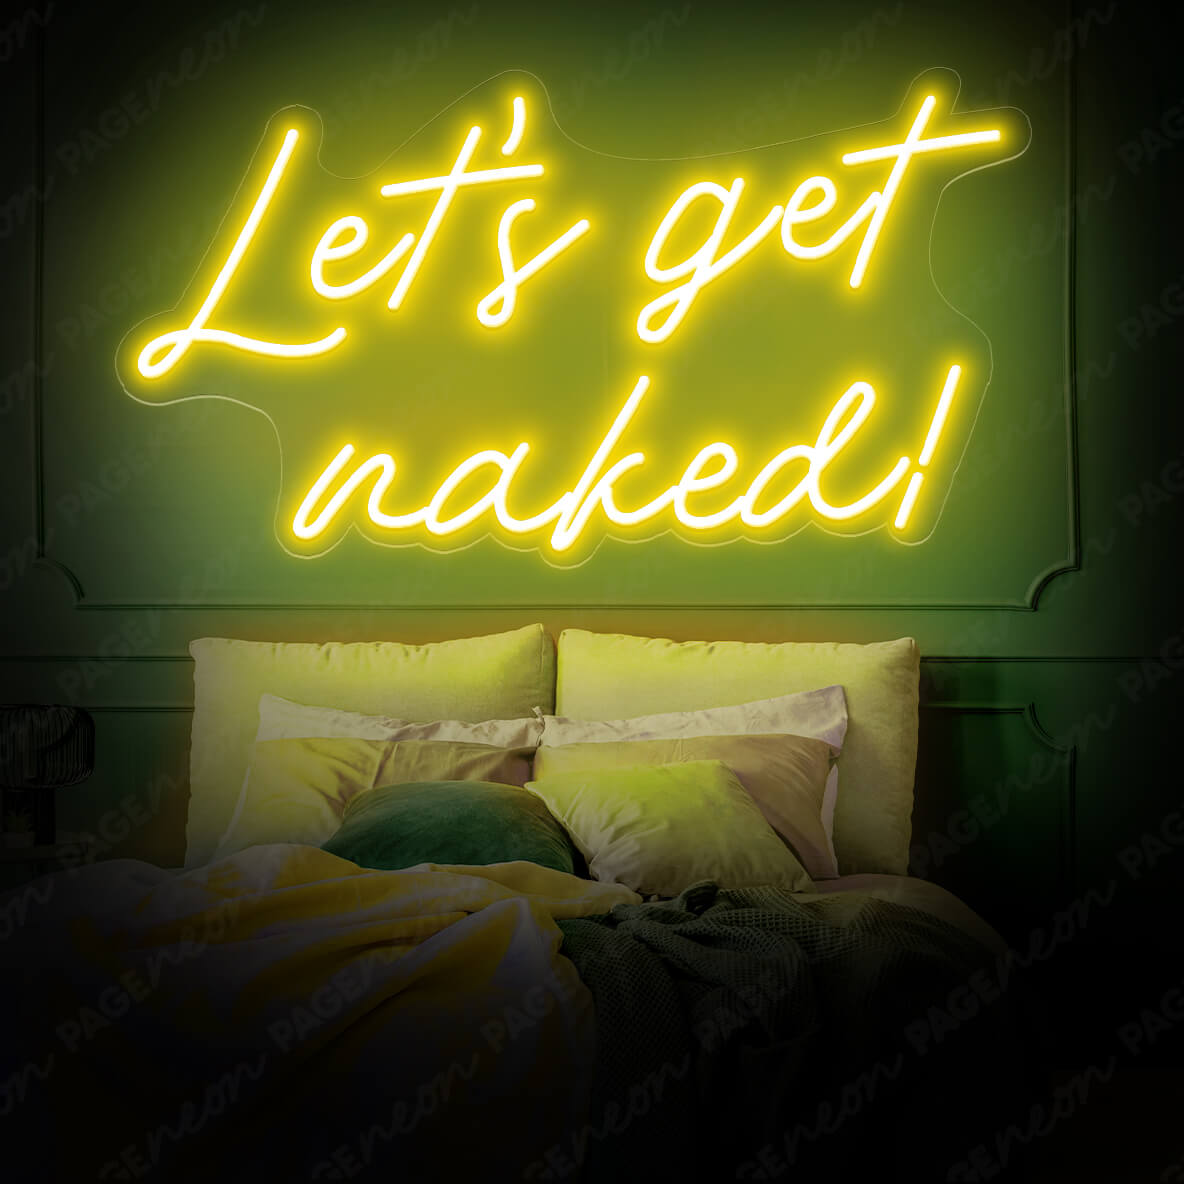 Let's Get Naked Neon Sign Man Cave Led Light Yellow